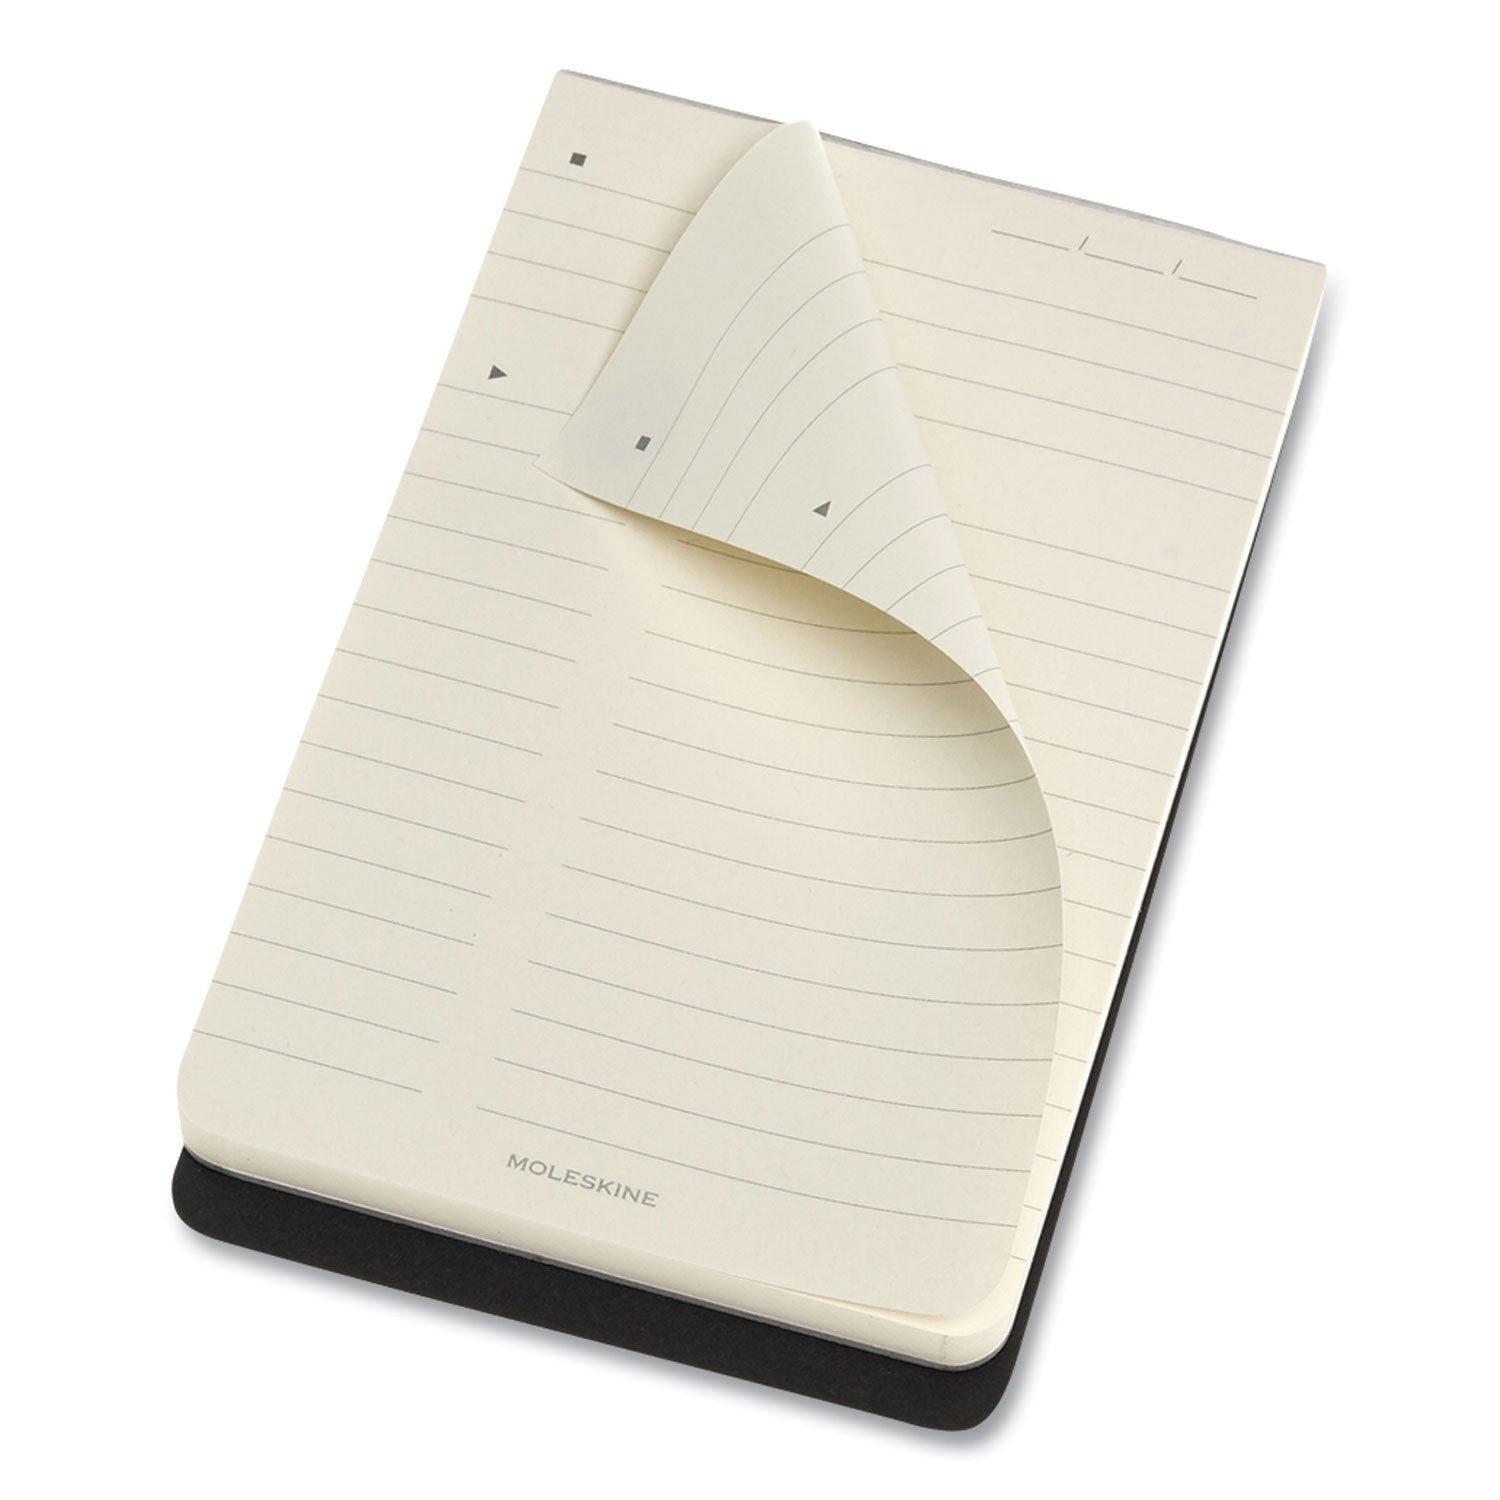 pro-pad-meeting-minutes-notes-format-black-cover-96-ivory-35-x-55-sheets_hbg620909 - 4